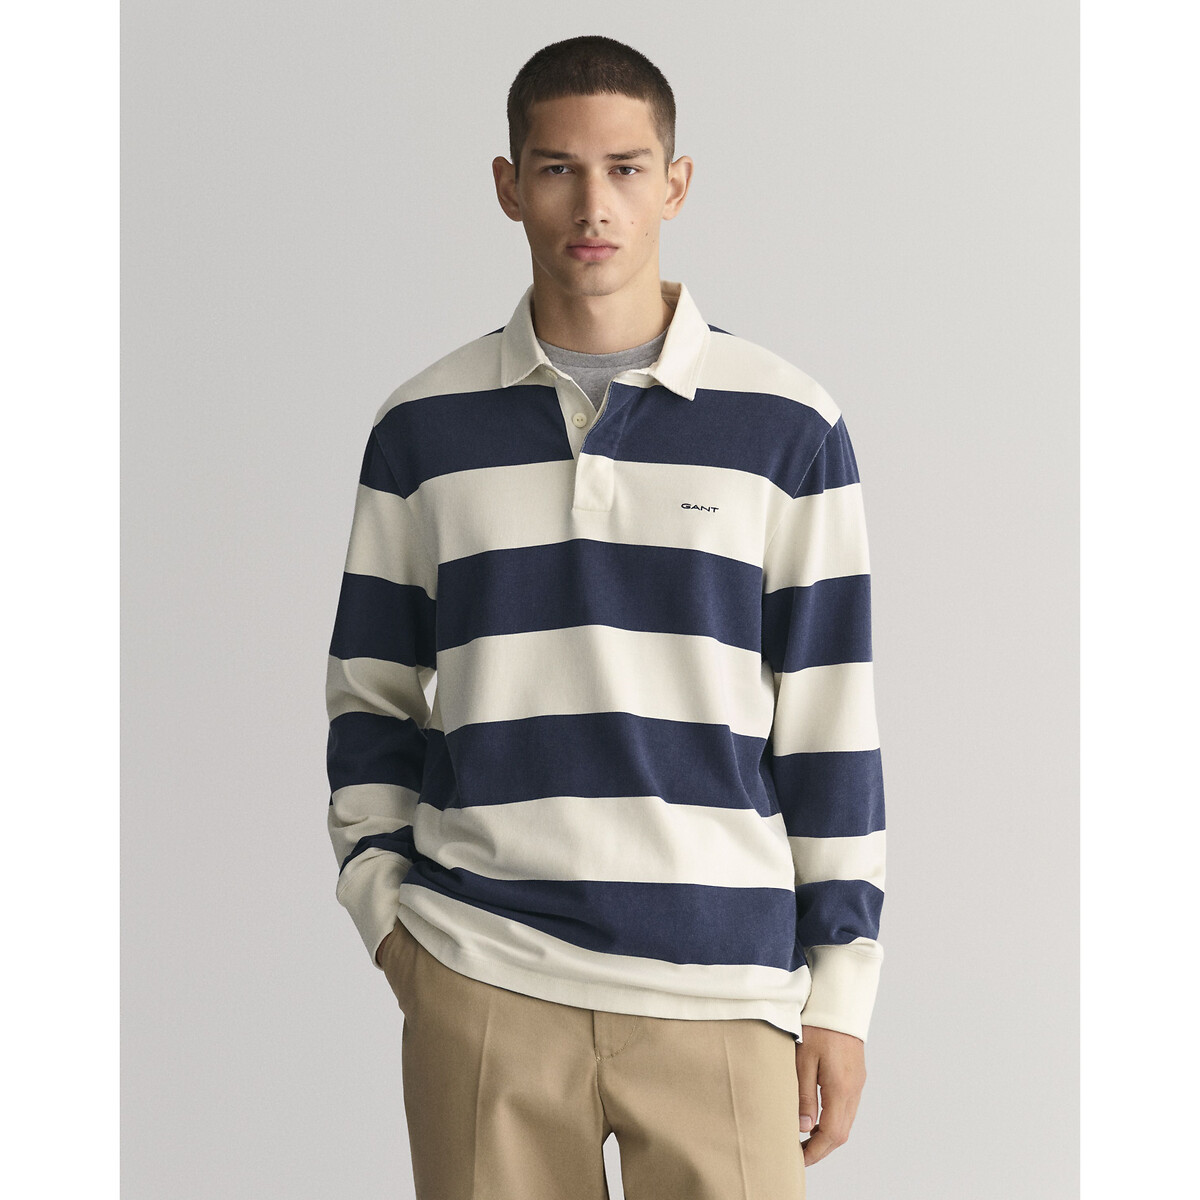 Image of Striped Rugby Polo Shirt in Cotton with Long Sleeves